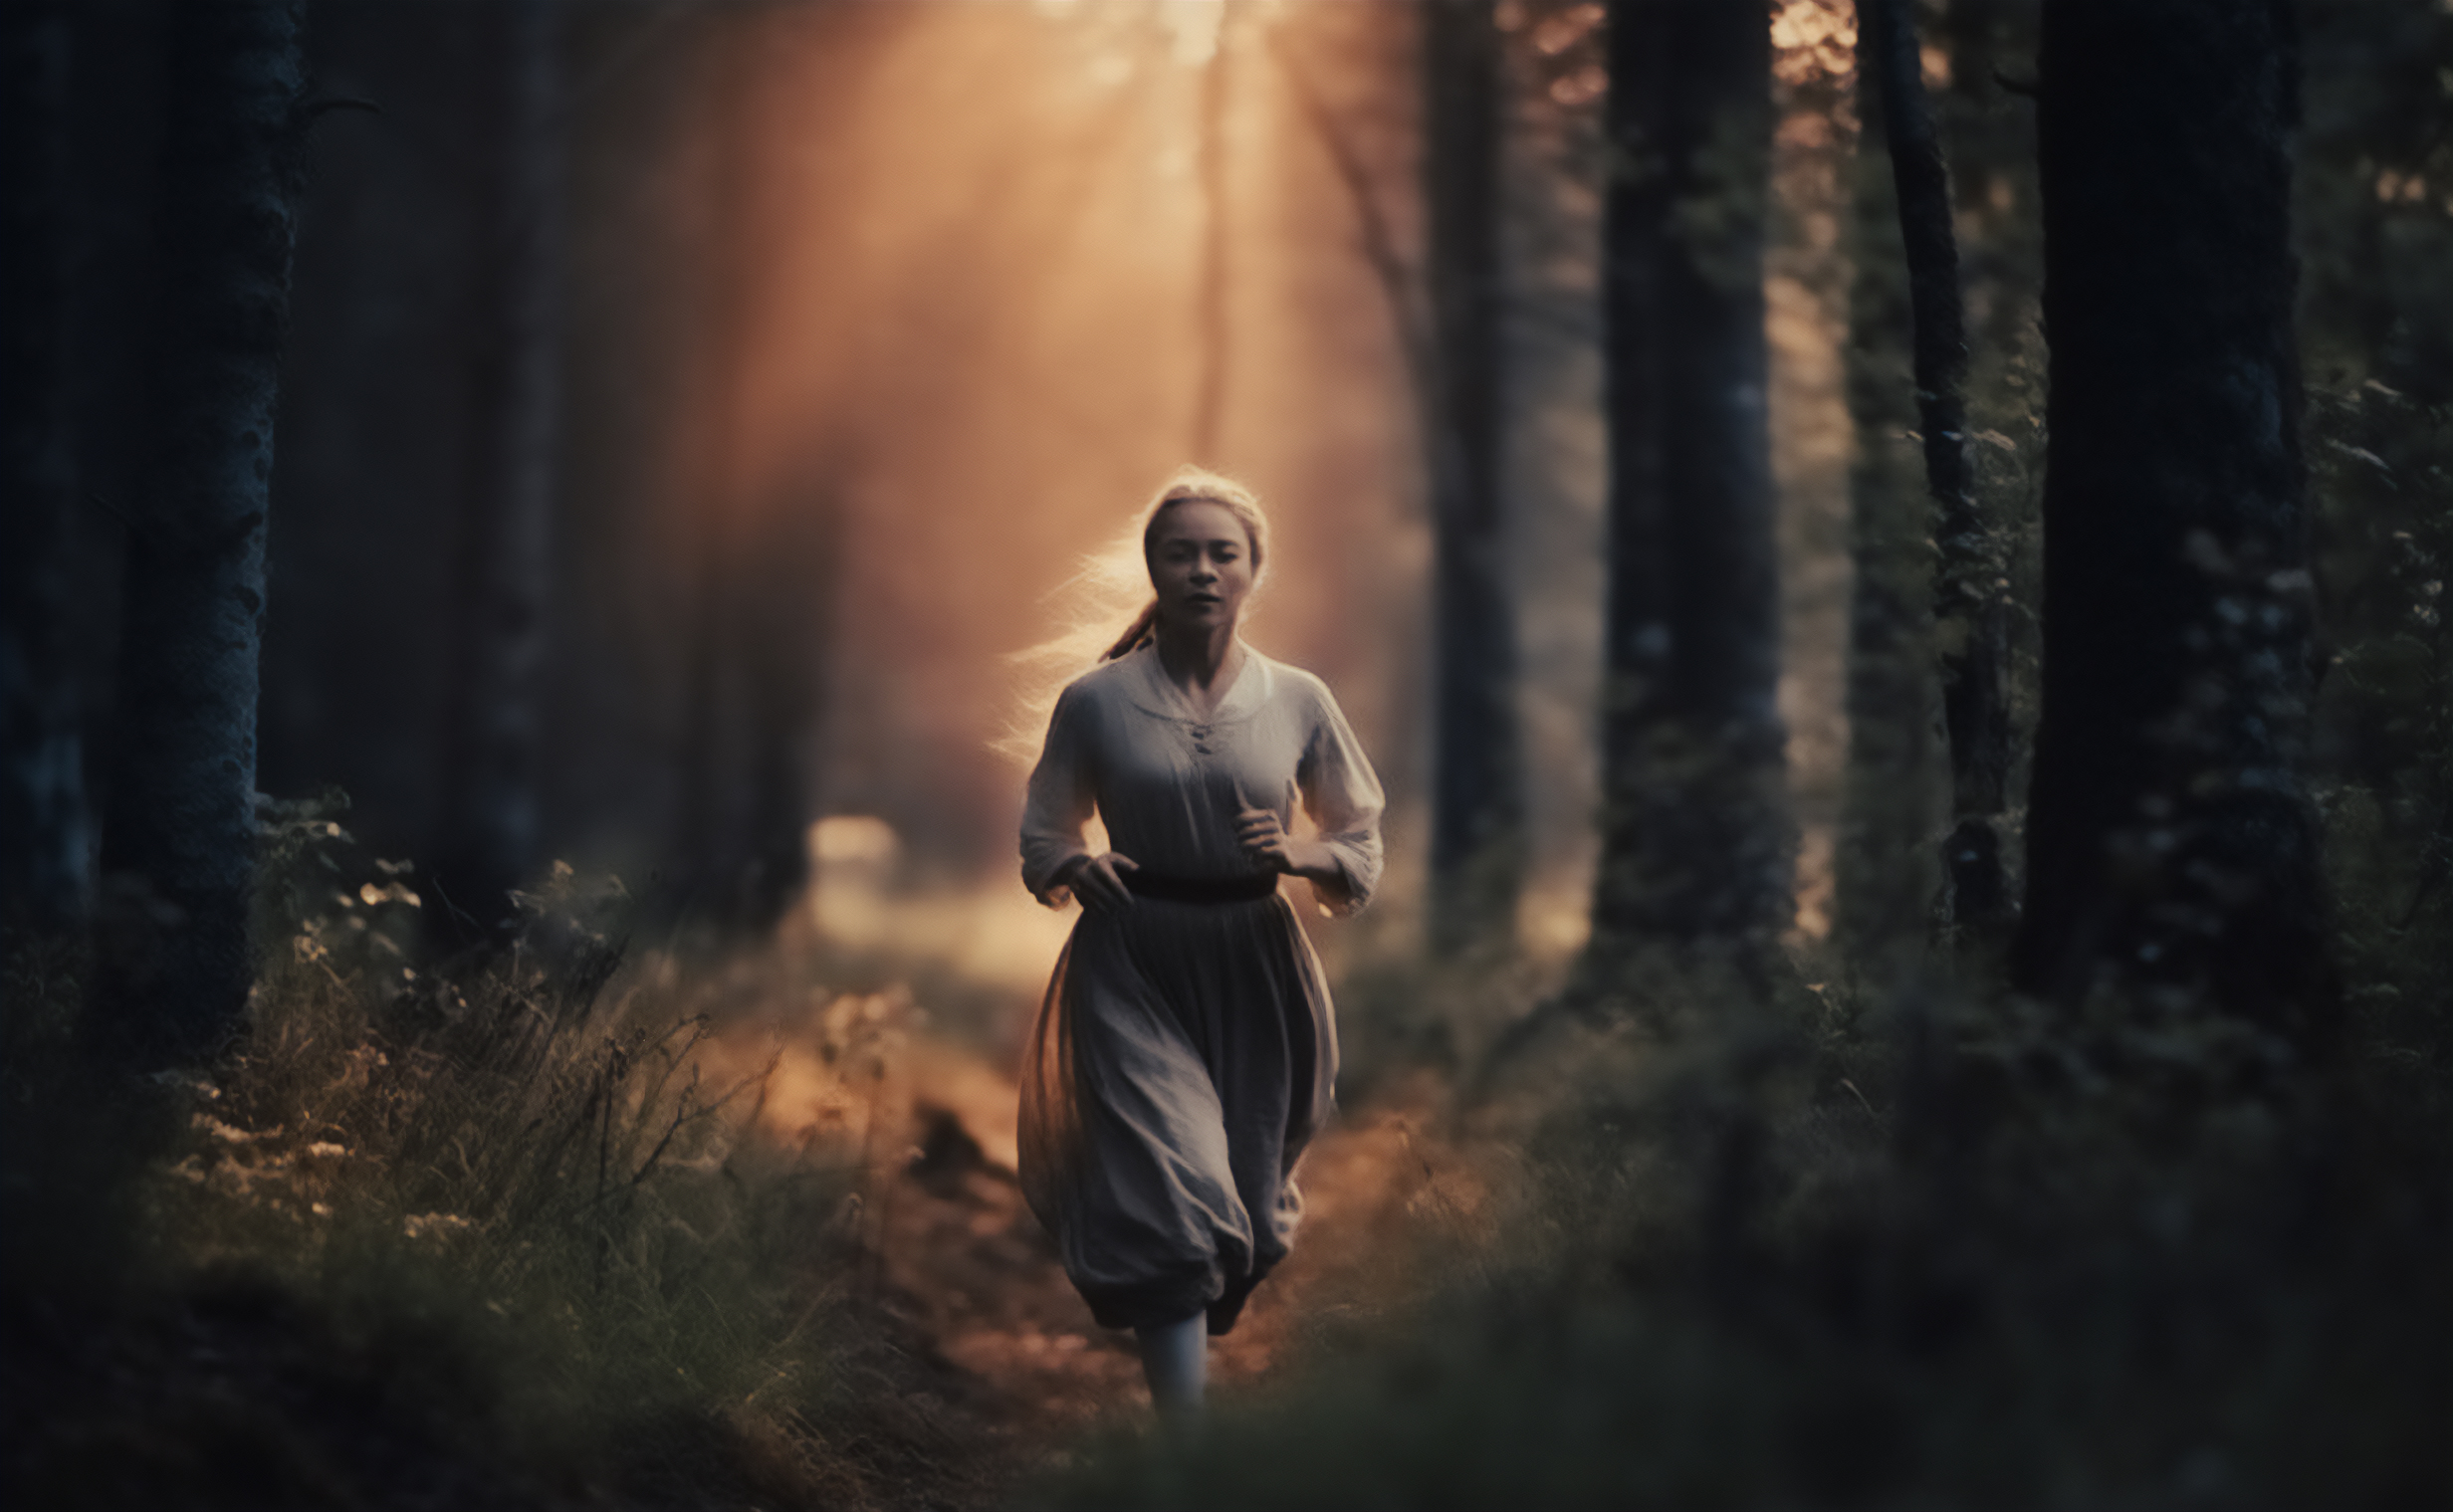 Girl running away in a Swedish forrest, key illustration for The Hidden Tragedy - The Torsåker Witch Trials.